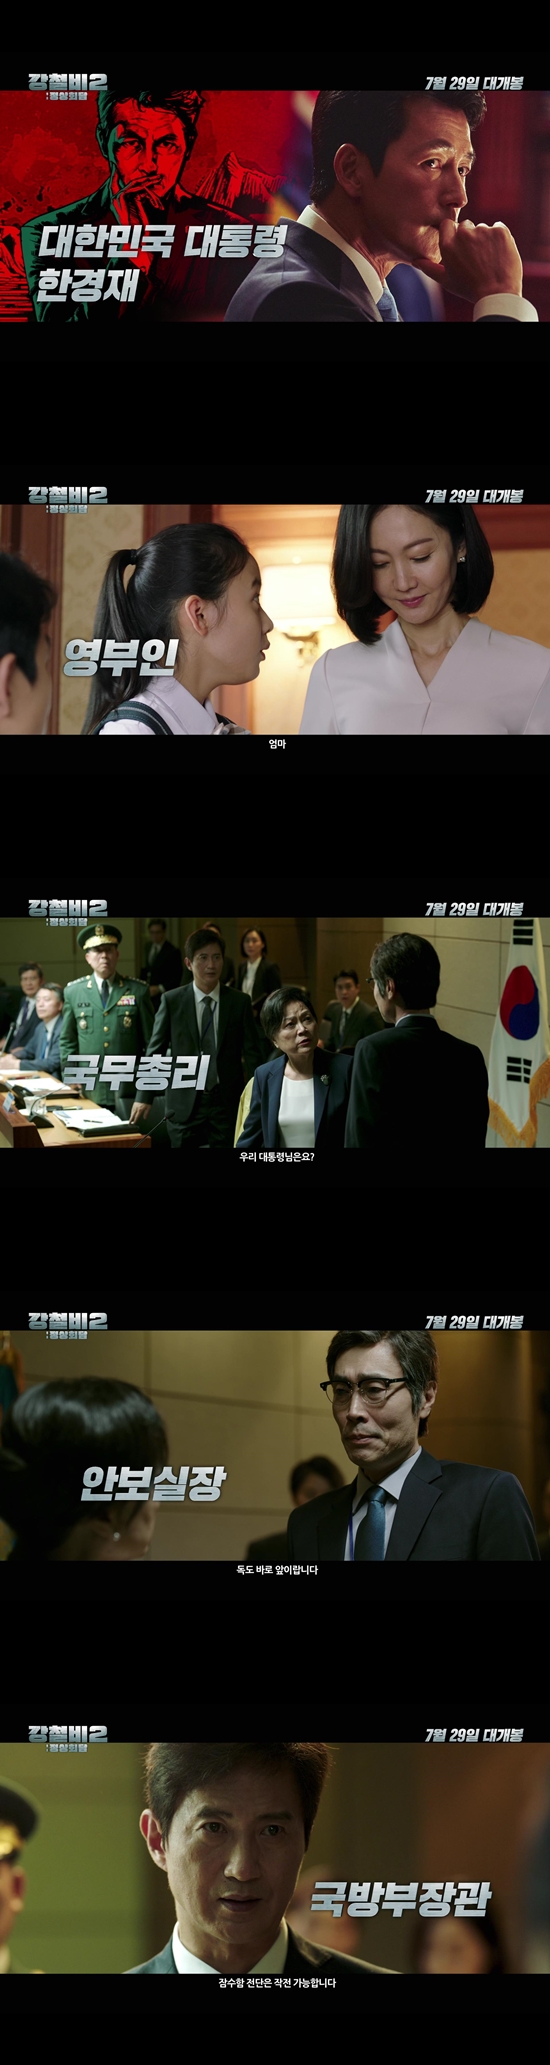 The movie Steel Rain 2: Summit (director Yang Woo-suk) released a character trailer featuring people moving south, north and the U.S.Steel Rain 2: Summit is a film depicting the situation of Danger just before the war that takes place after the three leaders were kidnapped by the nuclear submarines in the North during the North and South American Summit.First, President South Korea (Jung Woo-sung) is a normal father who is almost deprived of his allowance to his daughter before being the supreme leader of a Europe, and a sad Husband who shares his troubles with the first lady (Yeom Jung-ah), and can be seen as the most comfortable and human charm when he is with his family.On the other hand, I feel sad that I can not do anything as the president of South Korea, a divided party, like the ambassador, We have been invited to this peace meeting, but we have no place to sign it, but the fact that we are in a hurry to narrow the gap between the two leaders of North Korea and the United States,When South Korea was trying to establish a peace regime in Korean Peninsula, President North Korea was trapped in North Nuclear submarines along with the leaders of North Korea and the United States.The Prime Minister (Kim Yong-rim), the Security Chief (Lee Jae-yong) and the Minister of National Defense (Guidelines) of South Korea are the first to take care of the presidents safety and respond quickly.Meanwhile, Yoo Yeon-seok, who has Acted North Koreas young supreme leader, North Korea, who believes that the Norths path to live is denuclearization and openness, focuses attention on the will of North Korea leader who has carried out the North Korea-US peace agreement for the first time in history against hard-line opposition.In particular, as he tells South Korea President who hesitates to speak in English, he speaks fluently with the United States of America and looks at the international situation, showing off his human charm and bringing out unexpected laughter and chemistry.On the other hand, Kwak Do-won, who chose the chief of the escort general who caused the coup, thought that the North would live only by continuing the alliance with China, saying, Our Democratic Peoples Republic of Korea is reforming and opening up wrong. He expressed the patriotism and beliefs of the North Korean hardliners with his heavy acting.Here, the appearance of the North Korean chief strategist Baek Doo-ho (Shin Jung-geun) and the captain (Ryu Soo-young) in the submarine battle stimulates curiosity about what they will do between the three leaders of the South, North and the United States, who are confined to the North Nuclear Submarines, and the head of the escort general.Finally, Smoot (Wang Feifei) is a United States of America president from a businessman whose first priority is to return home with the North Korean nuclear program with the aim of making United States of America great again.The United States of America President Smoot, who is trapped in a narrow captains room but does not hesitate to speak to North Korean soldiers who threaten him with a self-centered attitude, saying American First, is curious with a variety of tensions and comics.Also, with the South, North and U.S. clean statues abducted, the first to check emerging powerhouse China and not hesitate to launch ICBM (intercontinental ballistic missile) and the appearance of United States of America (Colby French) is a matter of the issue of the Korean Peninsula, the Cold War island, It is entangled and it will spread to war that threatens peace all over the world, raising the sense of urgency.The character trailer of Steel Rain 2: Summit, which captures people who move their fate in different interests, different ways, and different ways, raises questions about what kind of drama characters will create in the drama.The Danger situation, which may actually happen between the South and North, the only divided nation on Earth where the Cold War continues, and the powers surrounding the Korean Peninsula, is the Jung Woo-sung, Kwak Do-won, Yoo Yeon-seok, and Angus Wang Feifei.Steel Rain 2: Summit will be released on July 29th through the coexistence and confrontation of four actors who combine personality and acting power.Photo = Lotte Entertainment